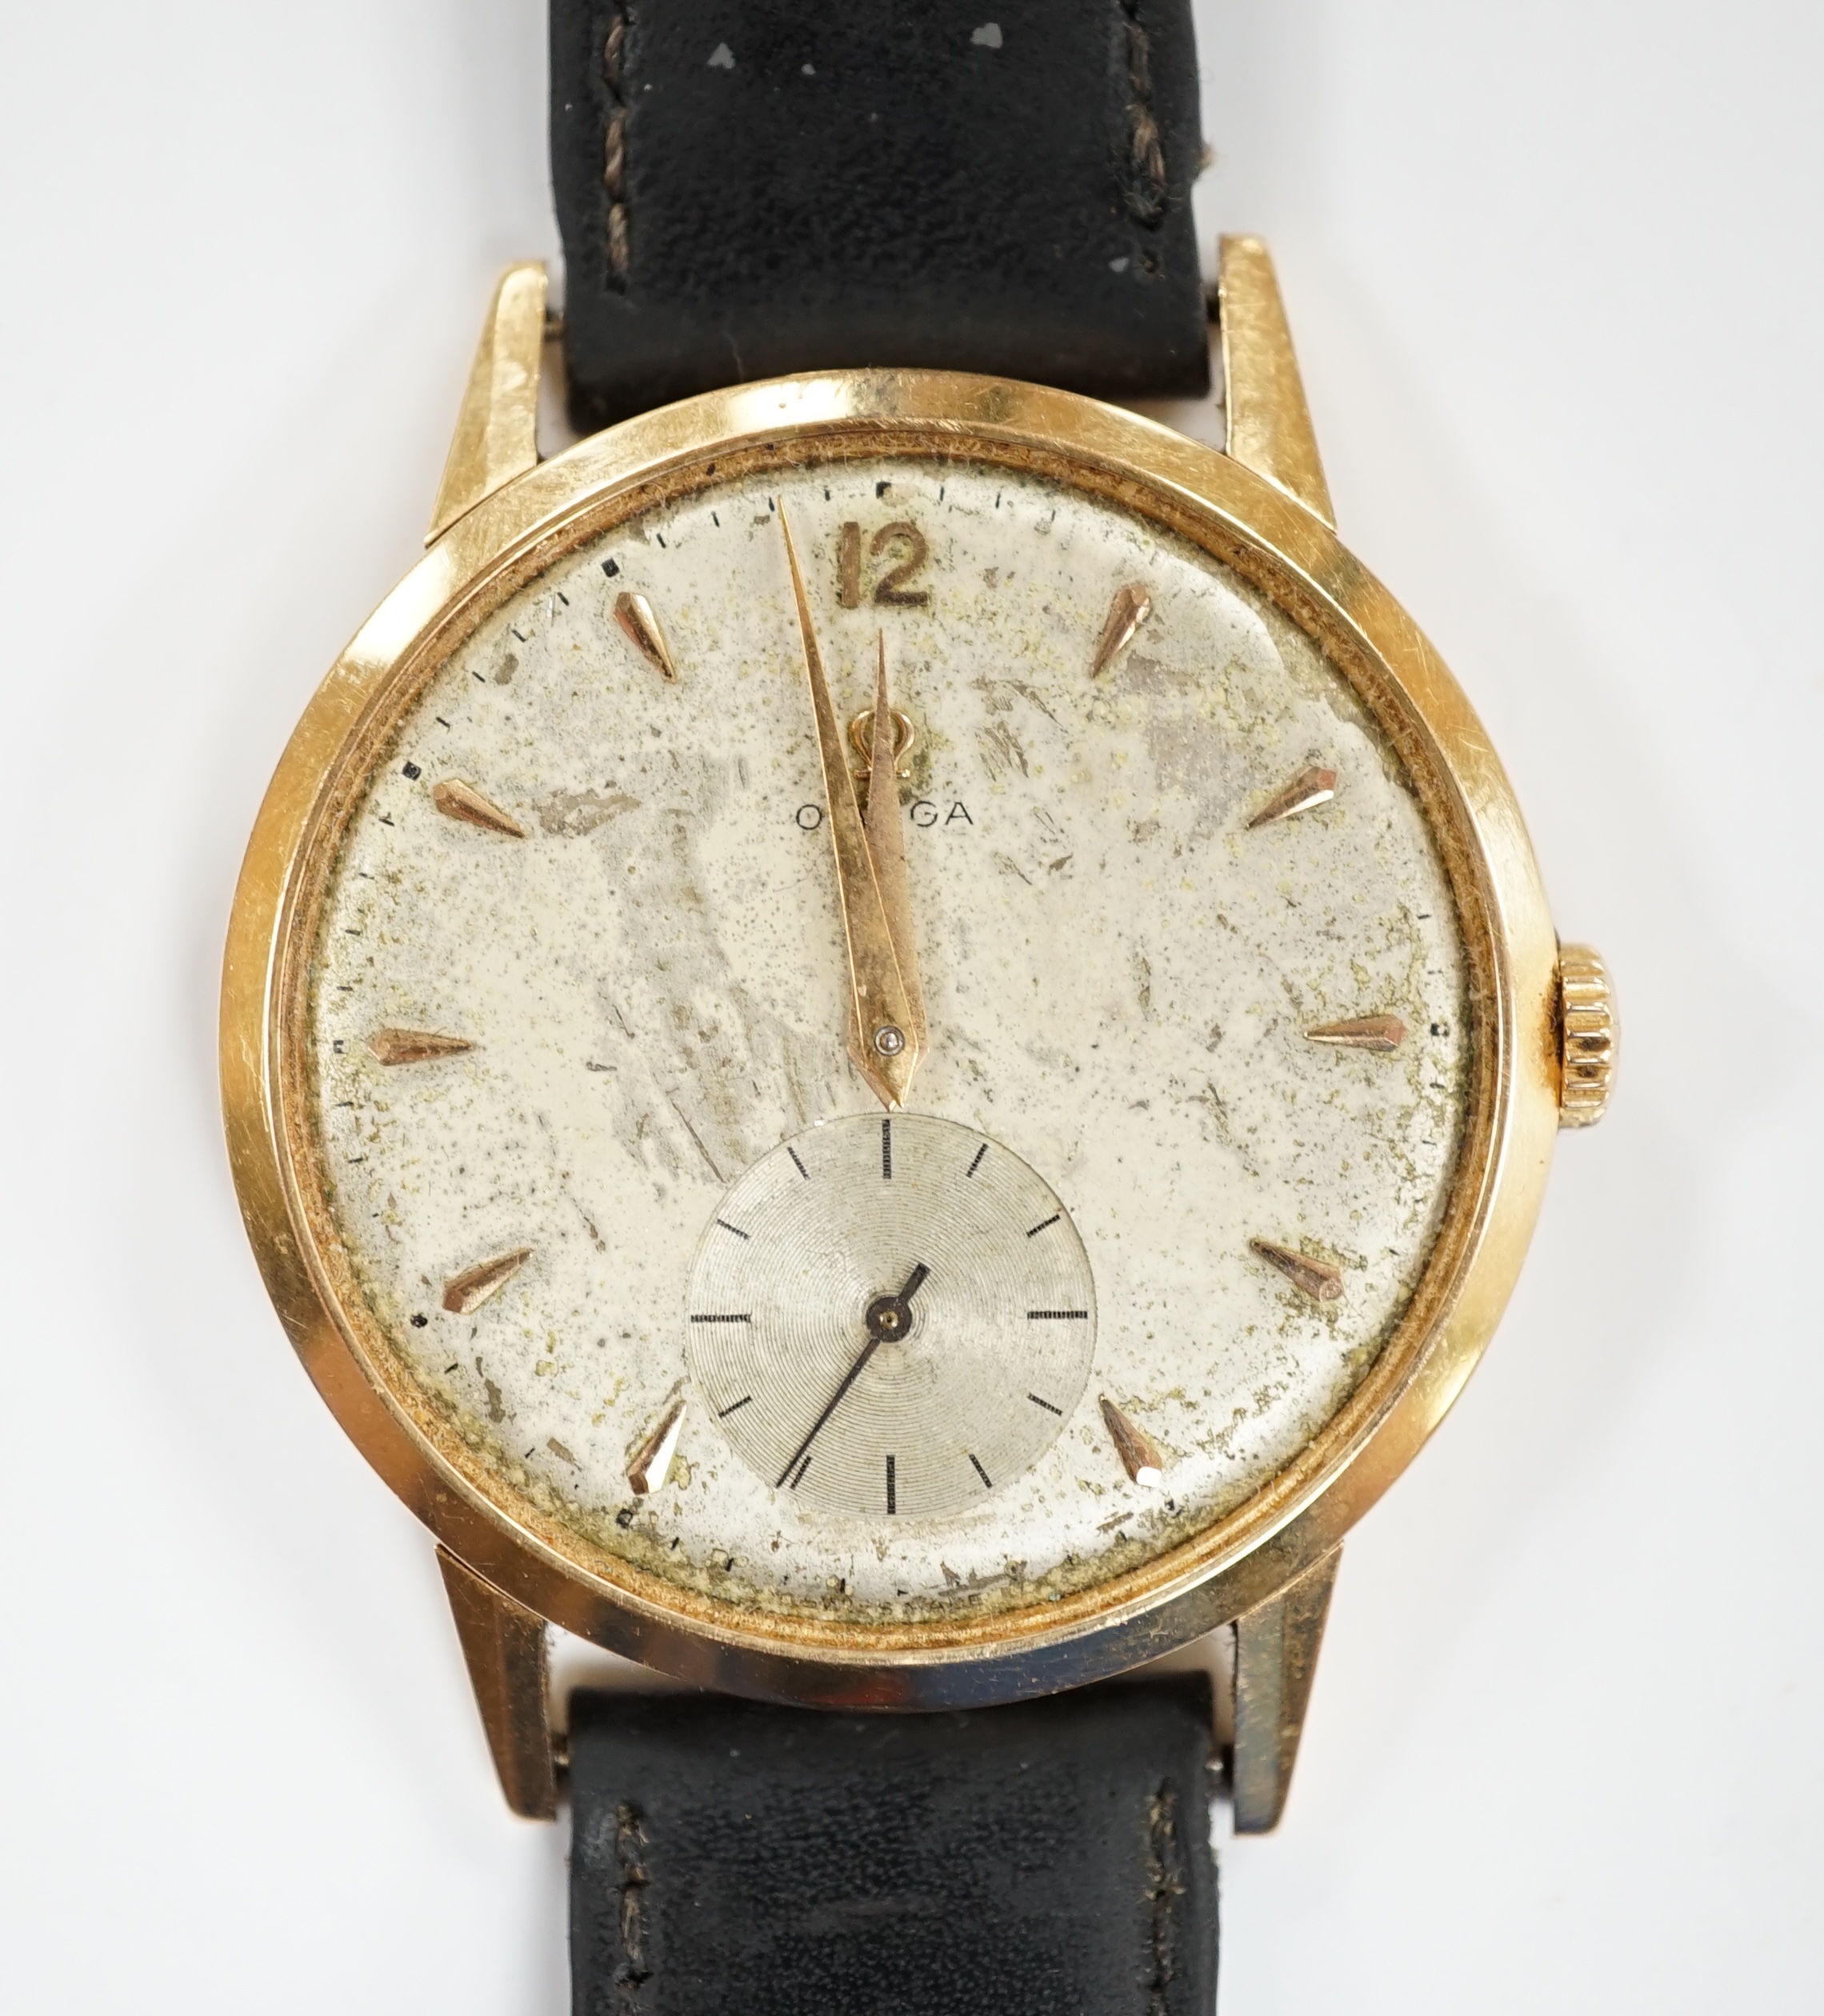 A gentleman's 18k Omega manual wind wrist watch, on a later associated leather strap, case